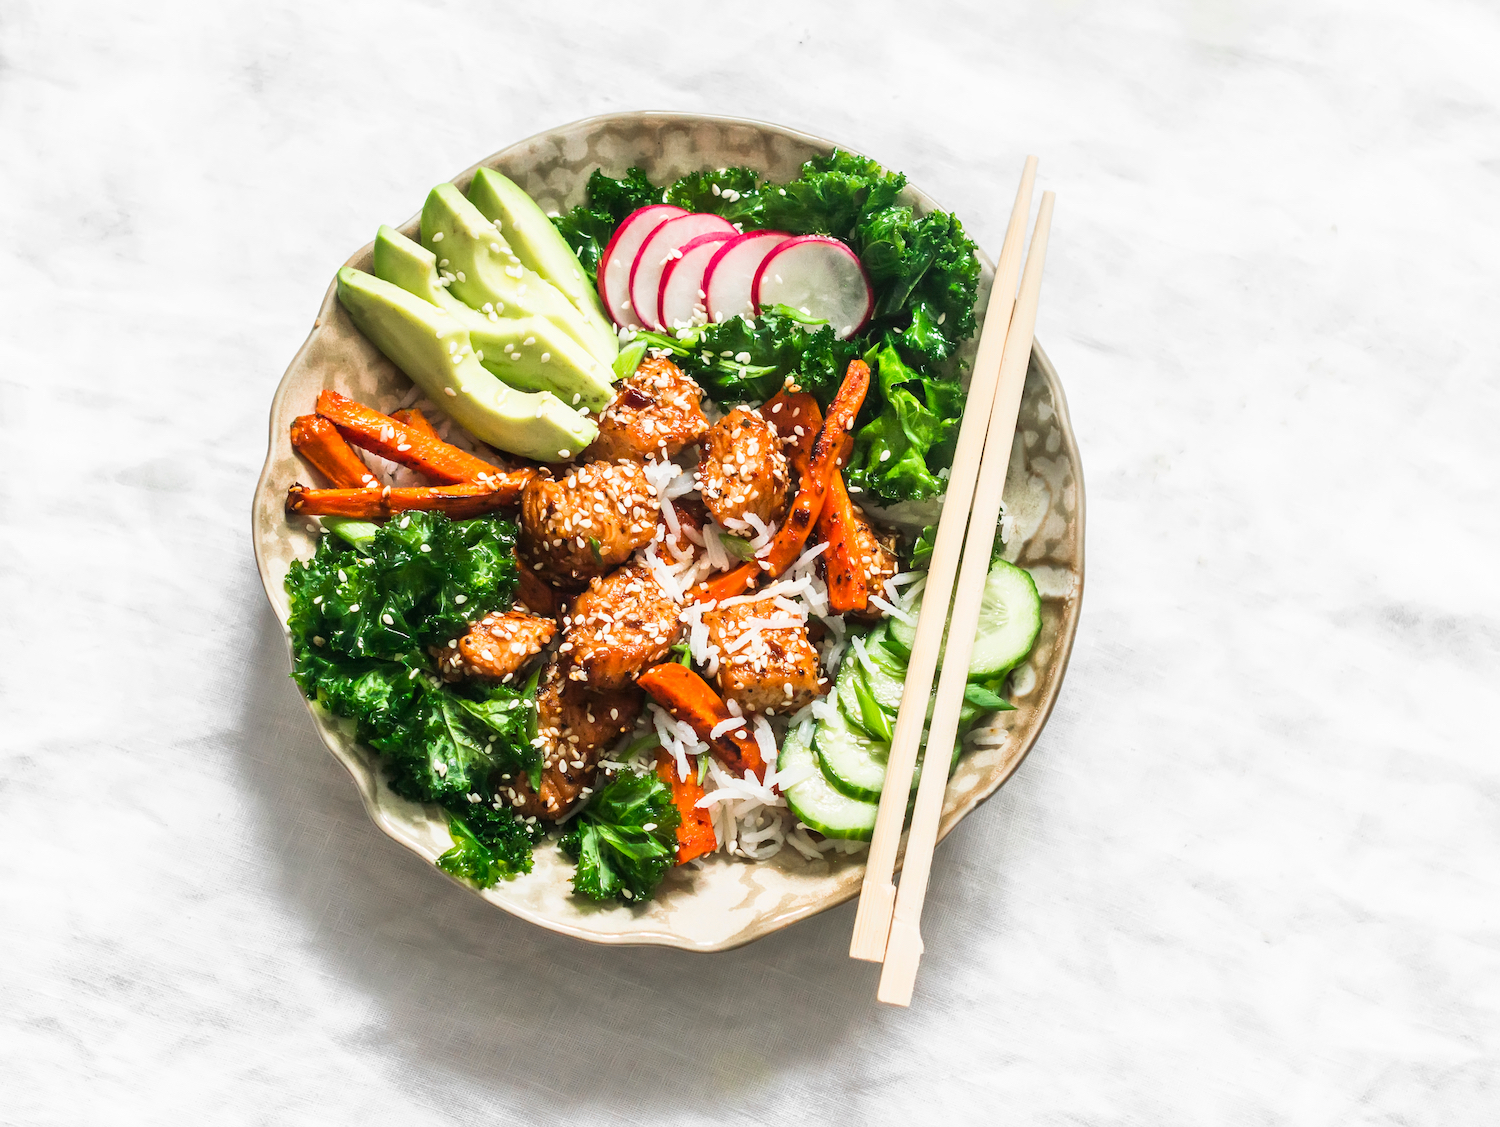 Introducing Global Bowls: Bringing Authentic Flavors to Our Partners